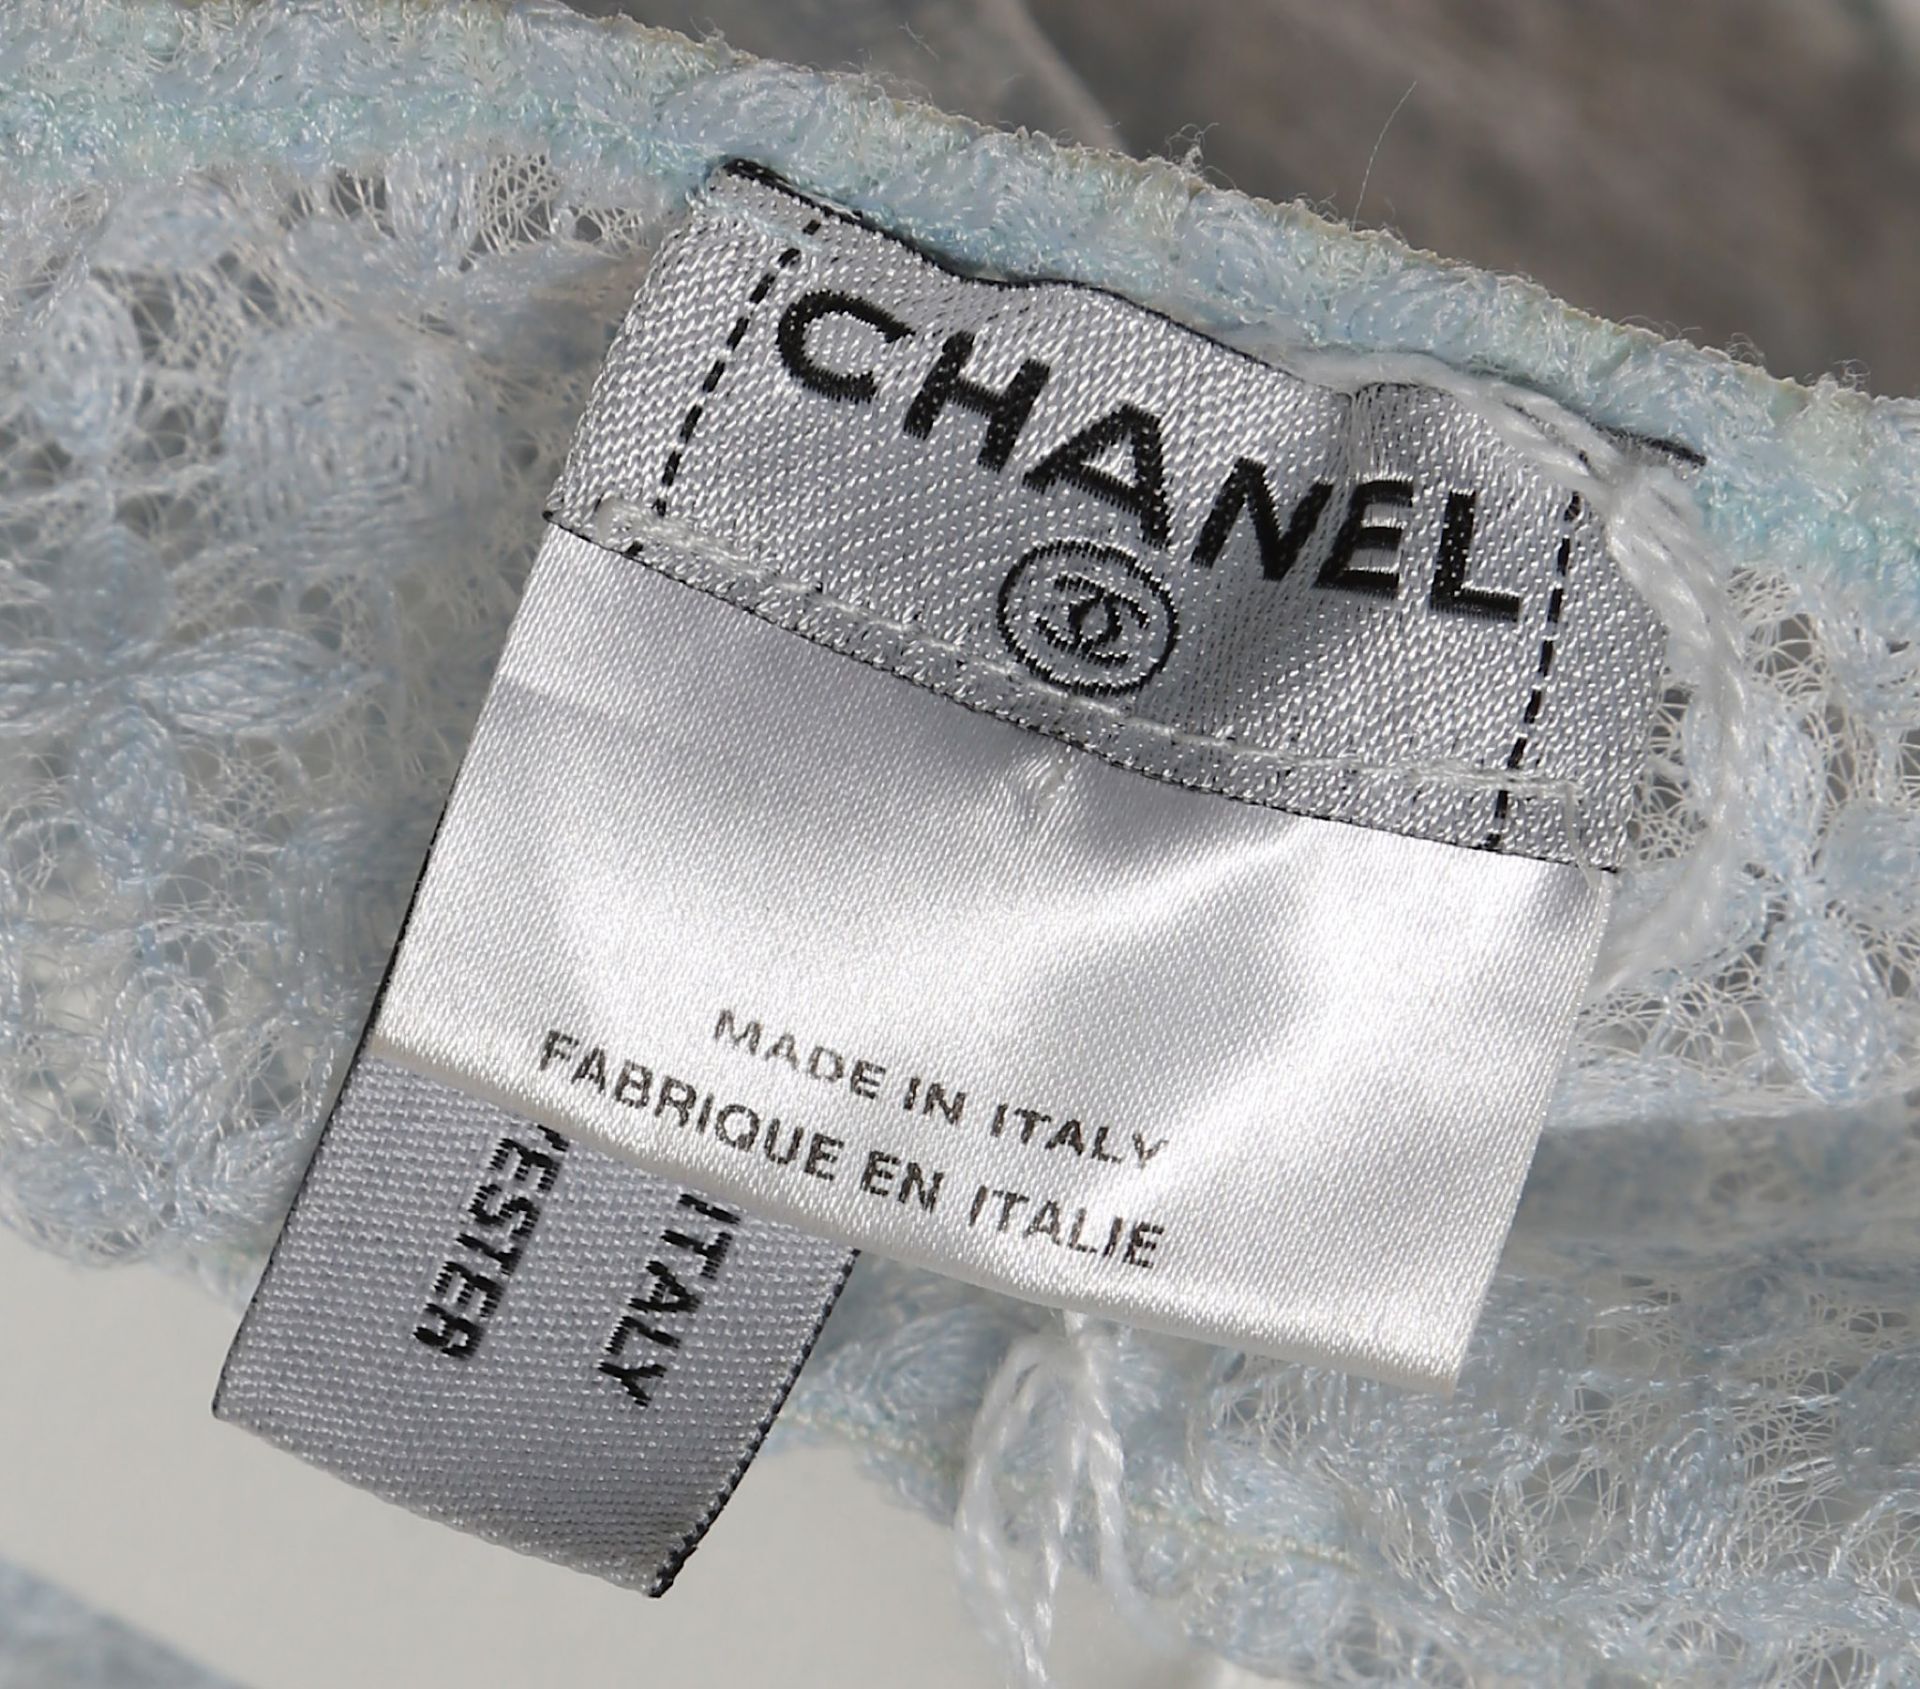 Chanel Baby Blue Lace Top, c. 2007, sleeveless des - Image 4 of 6